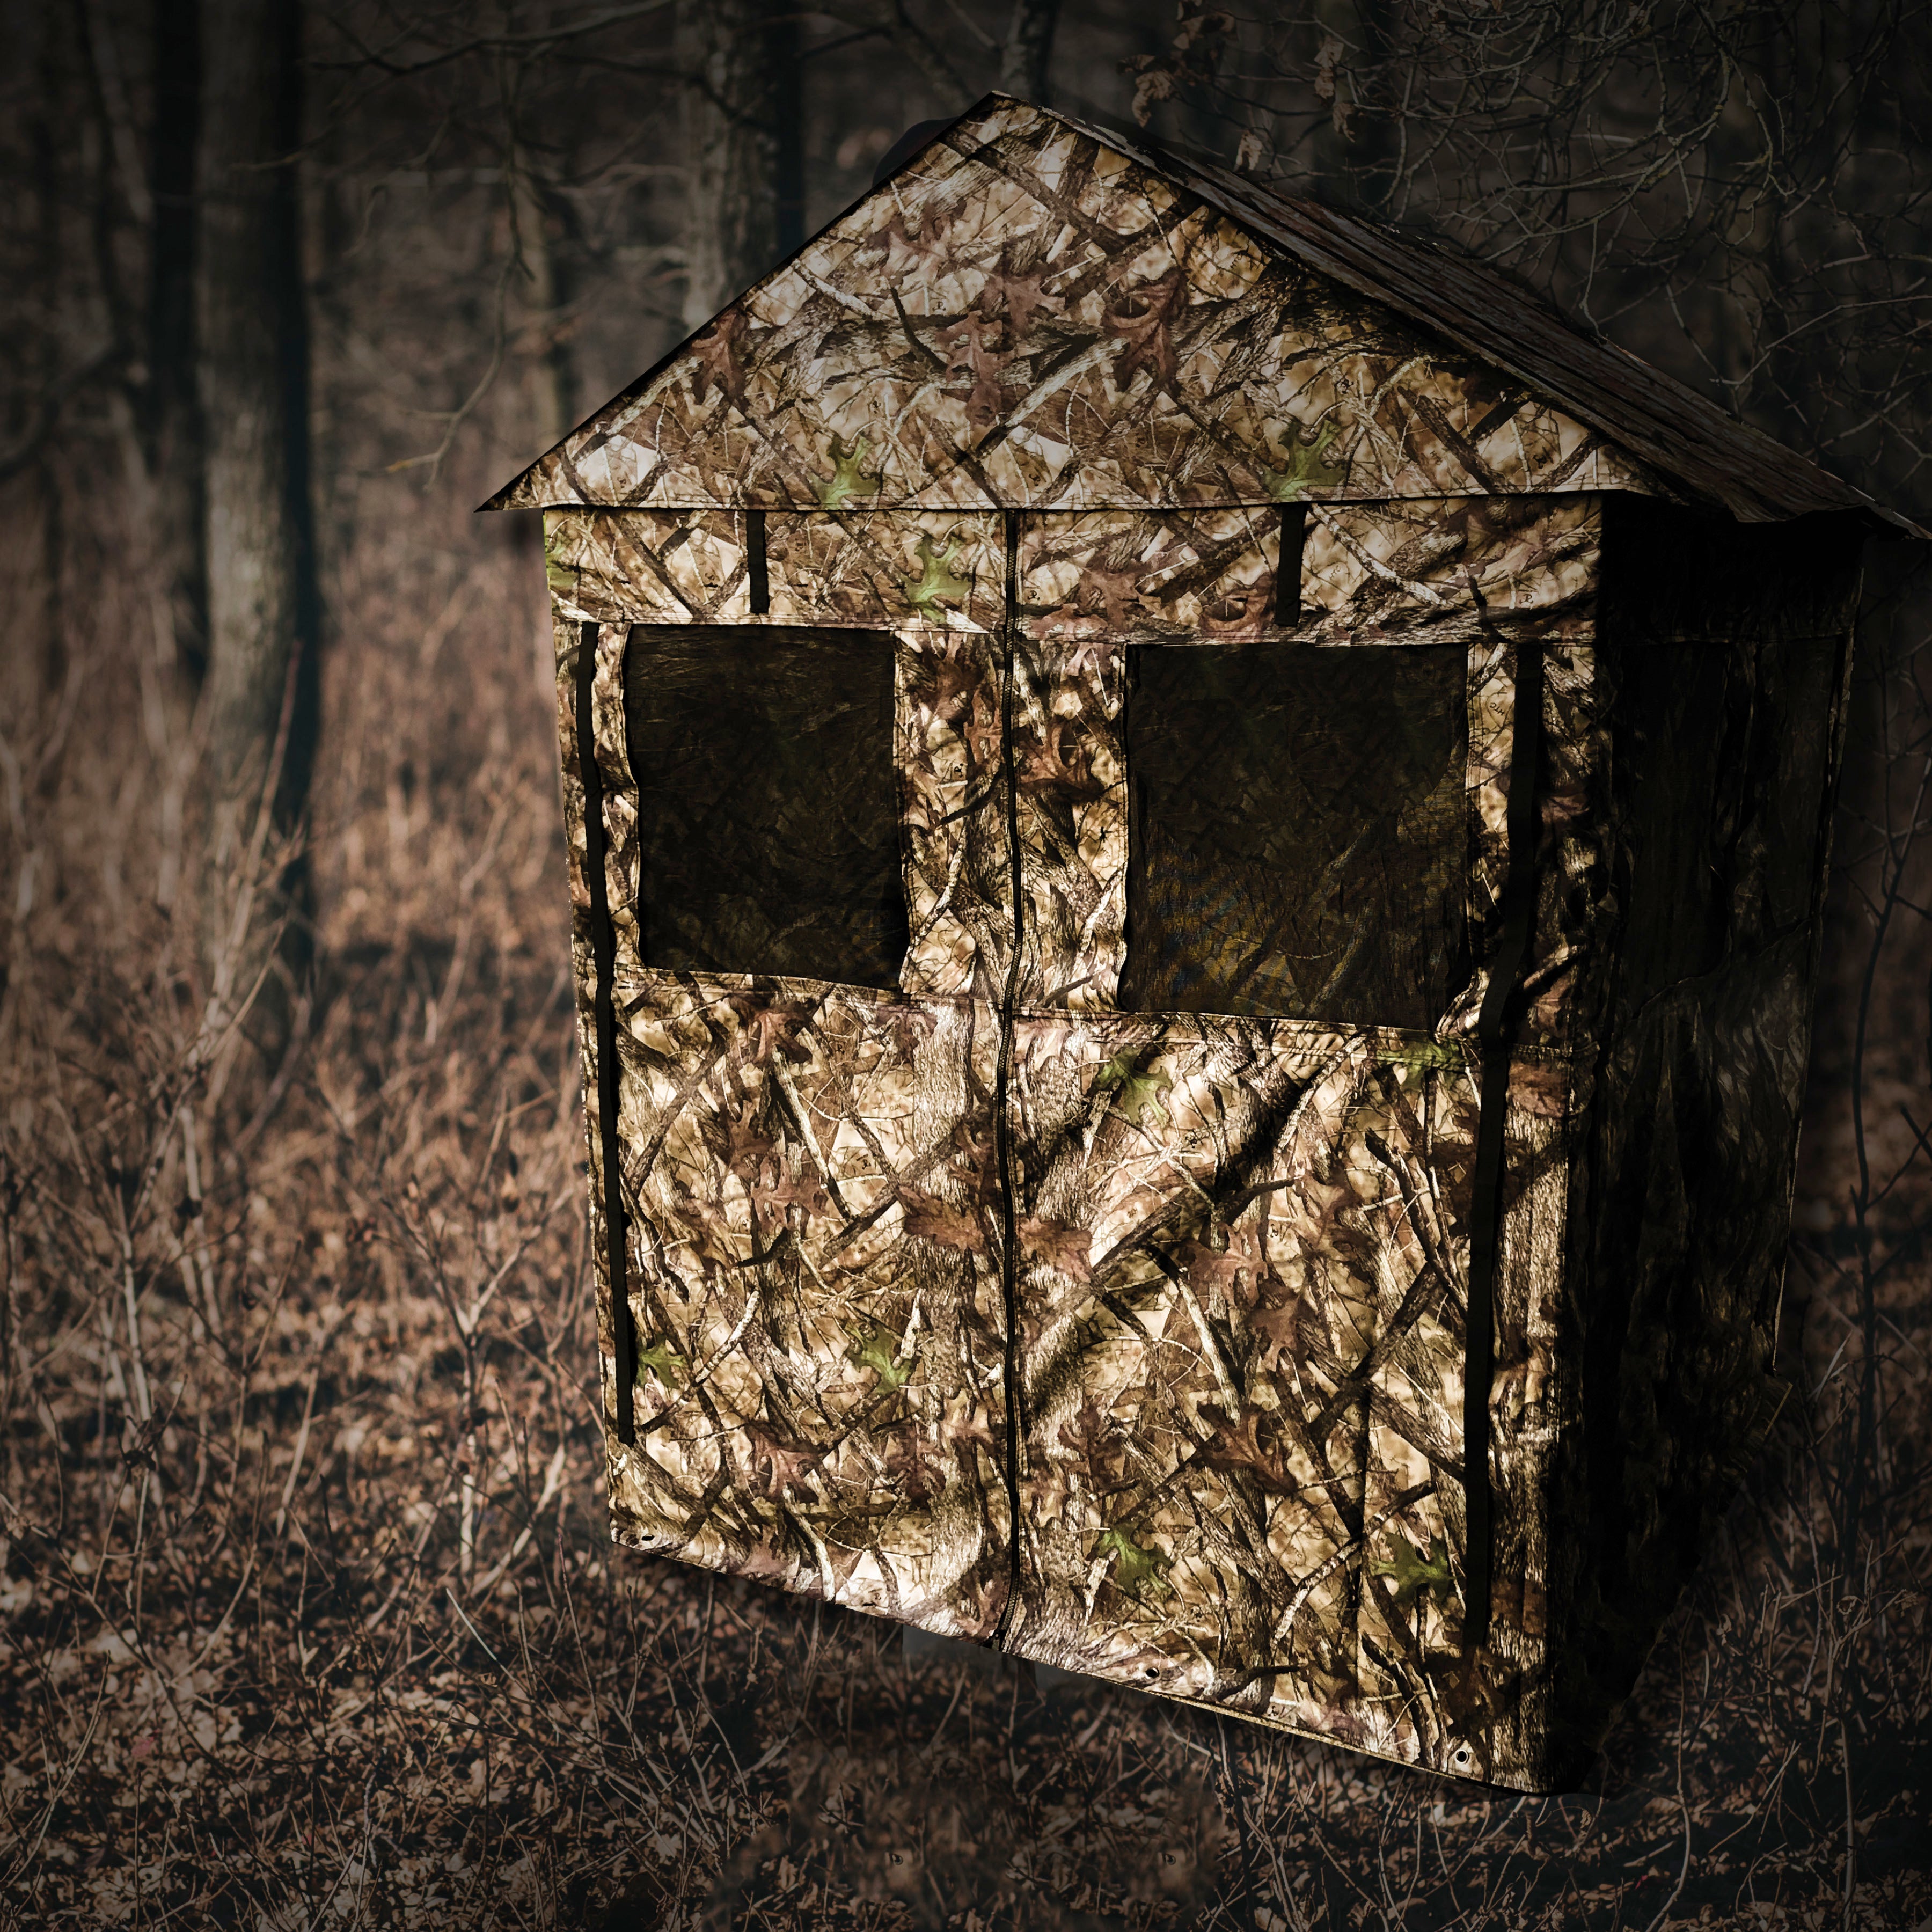 Deluxe Cabin-Style Ground Blind 5' x 5' x 7'